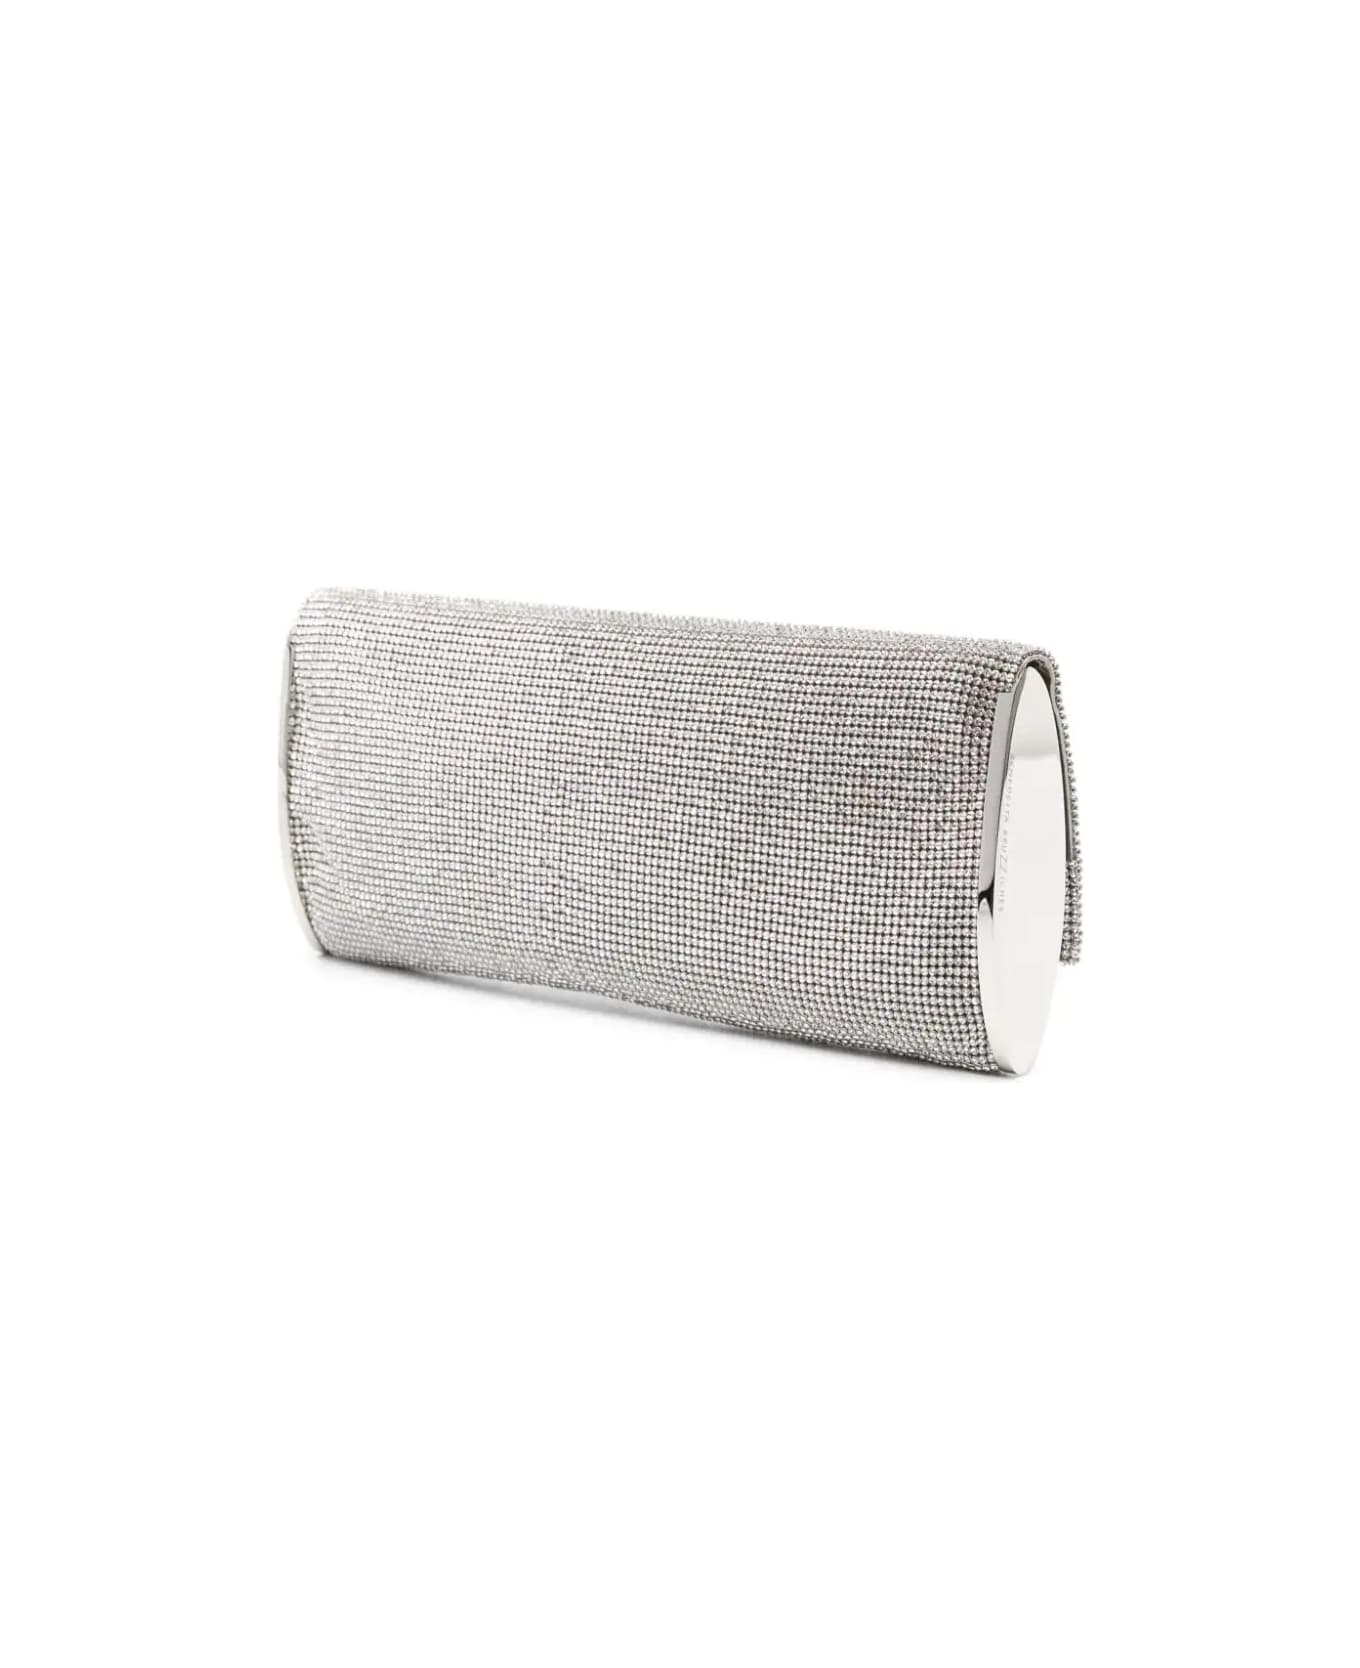 Benedetta Bruzziches Kate Crystal Bag Crystal On Silver - Silver